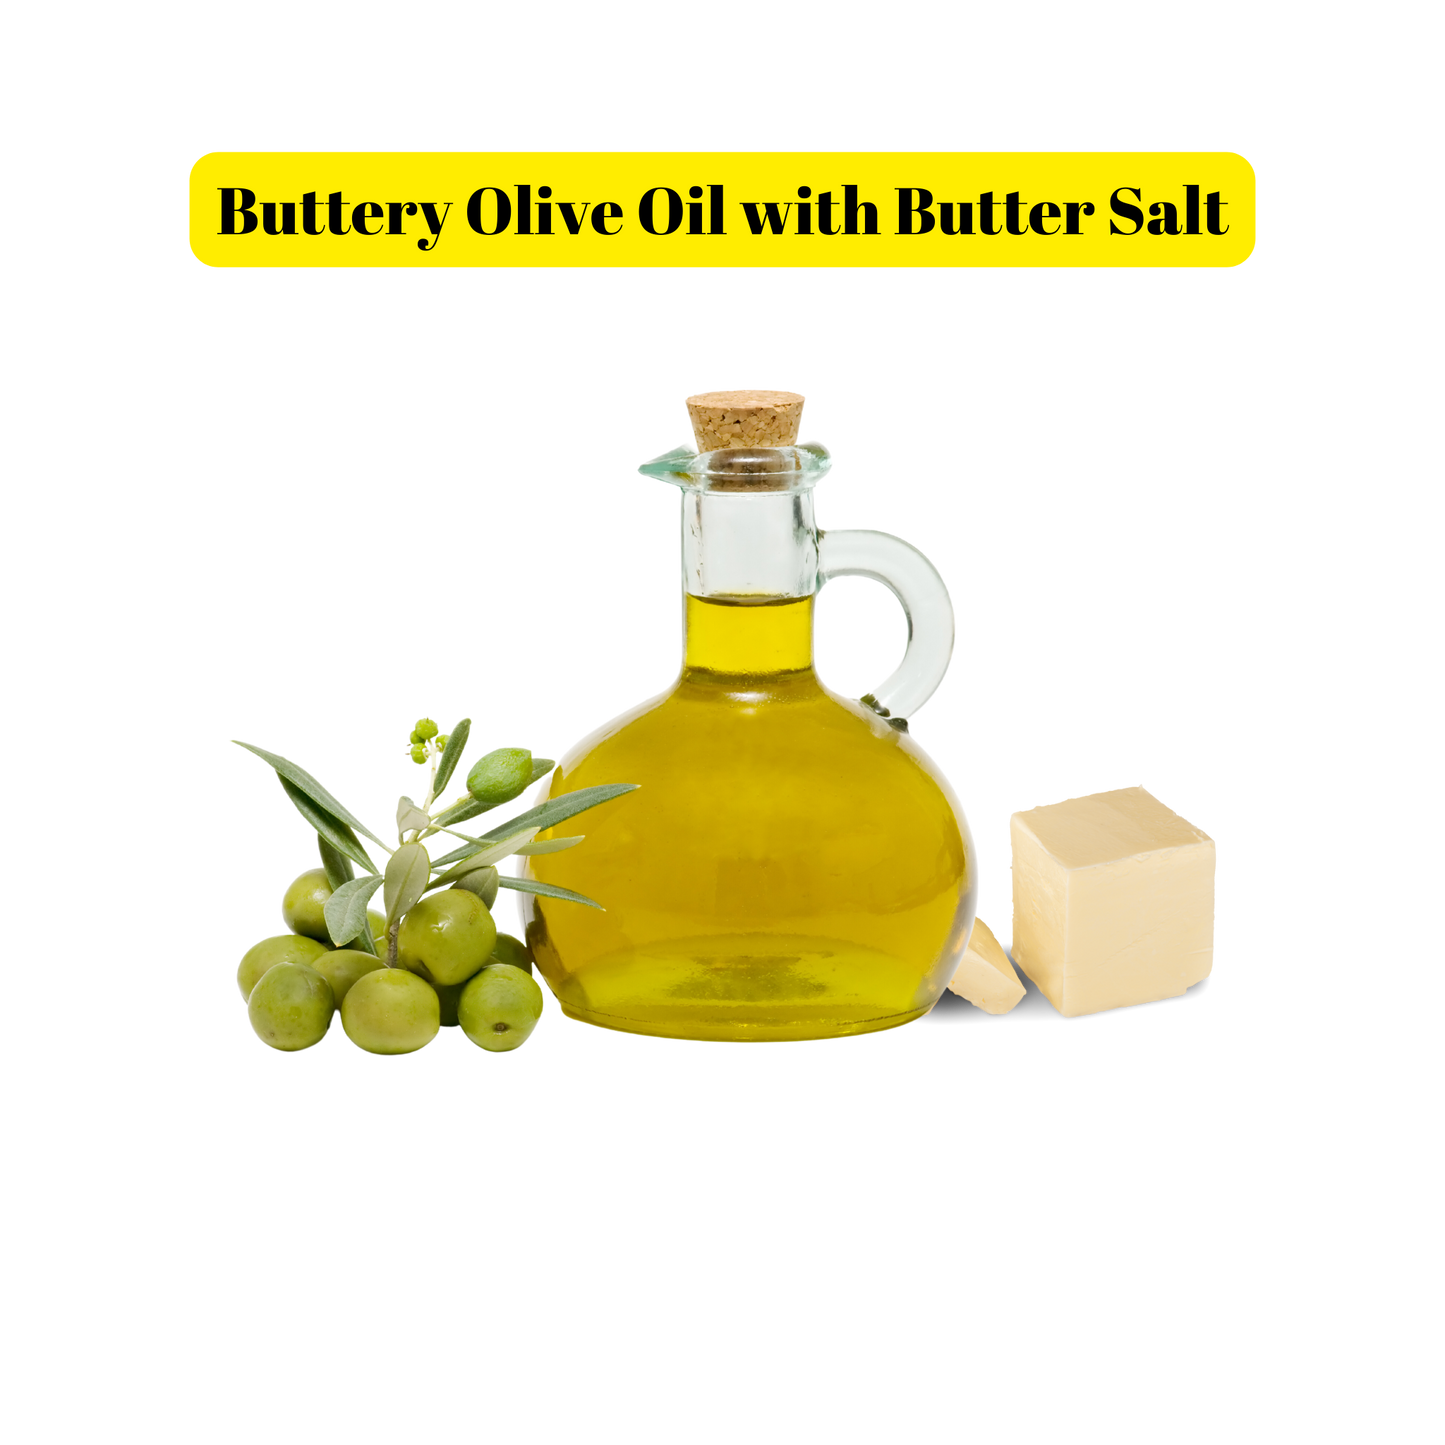 Buttery Olive Oil with Butter Salt